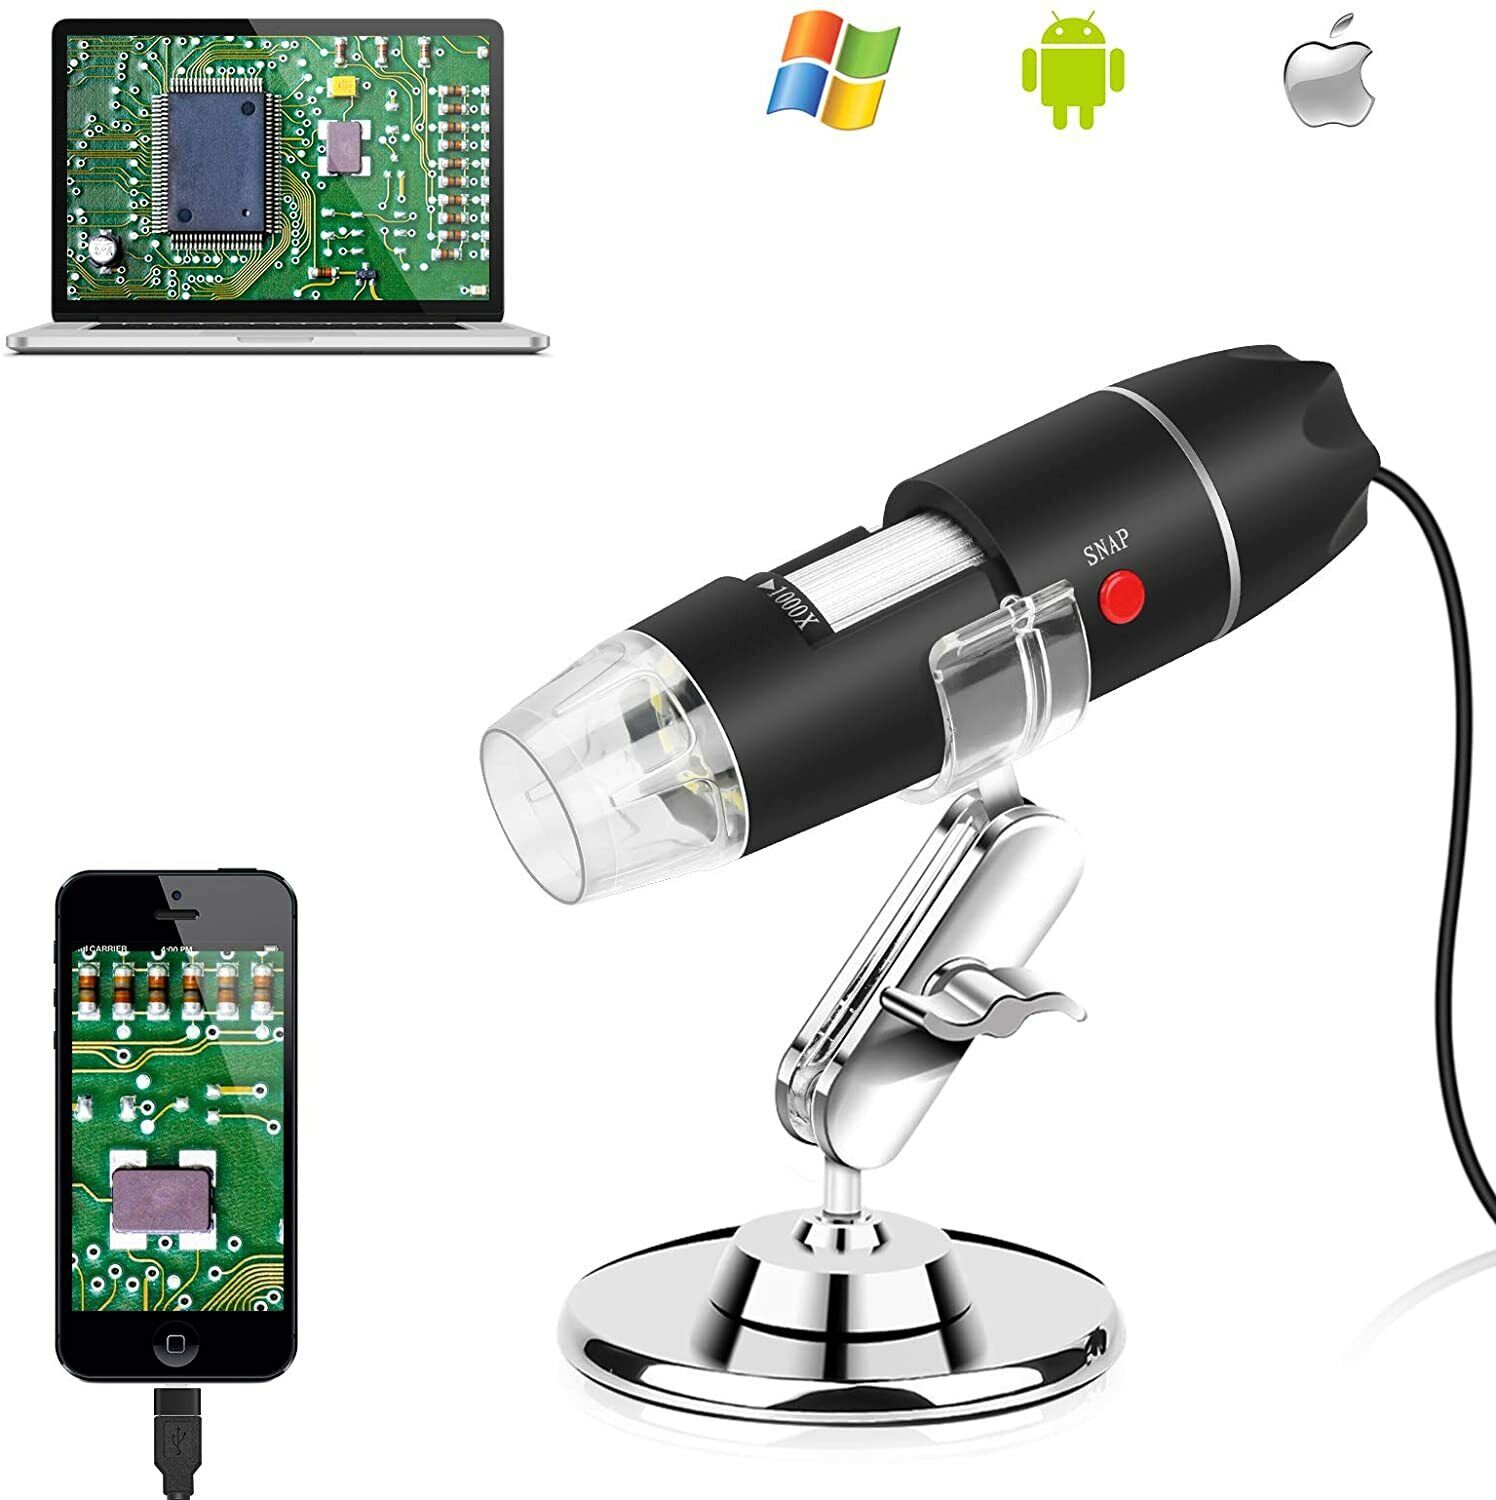 40X to 1000X USB Digital Microscope Magnifier Endoscope Camera for Phone Laptop